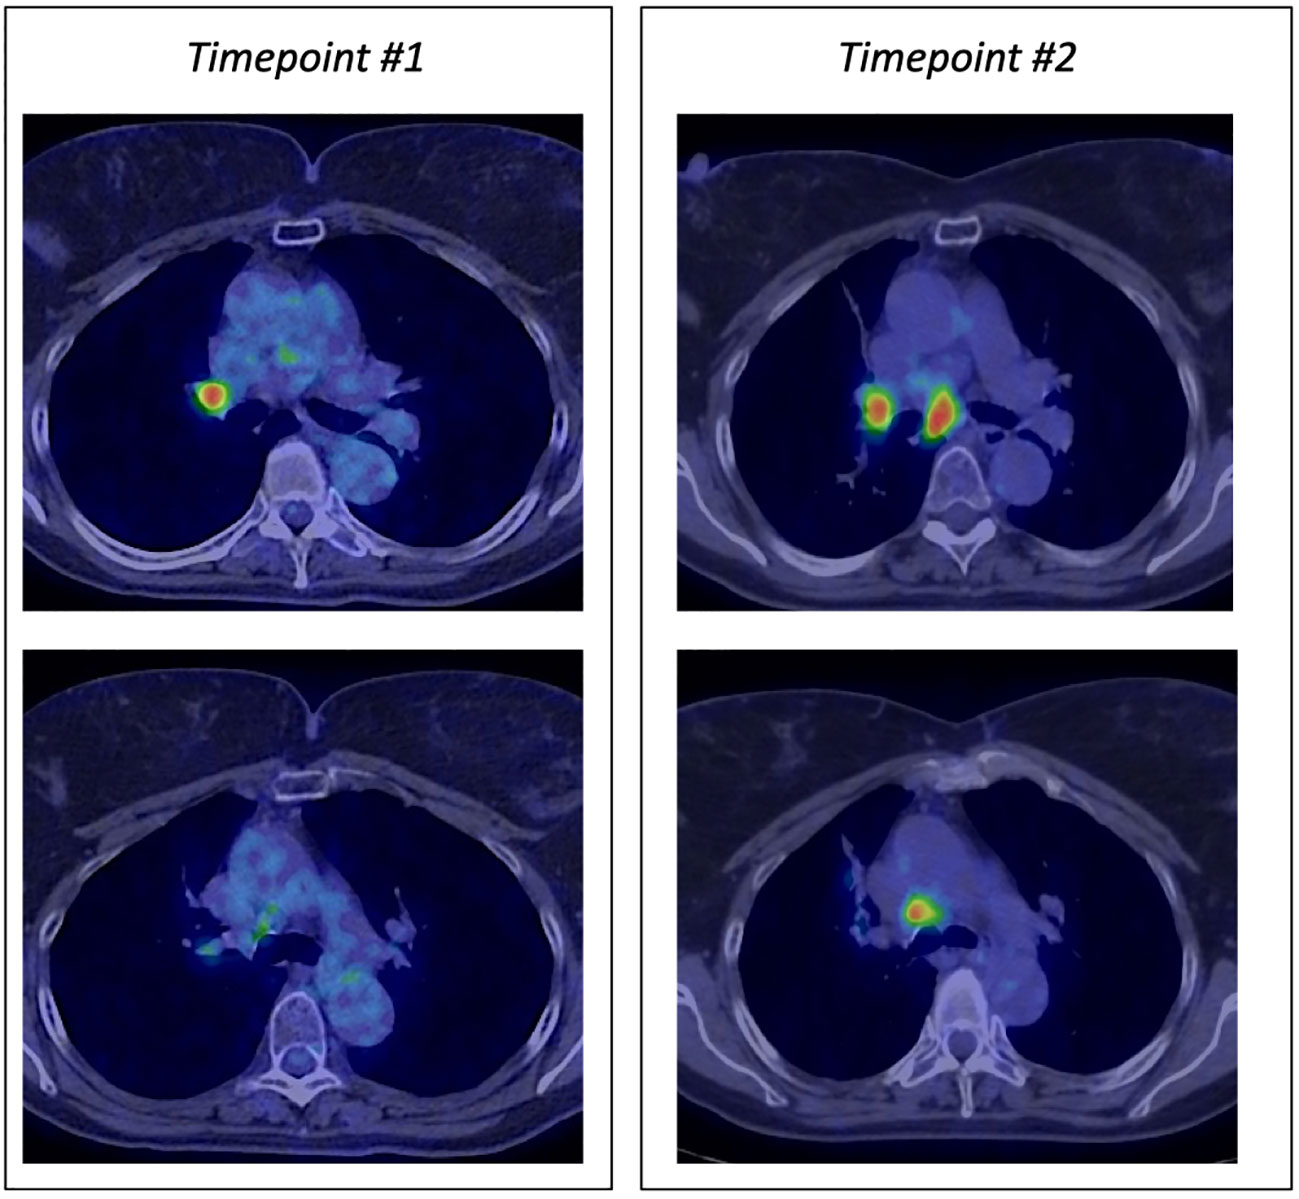 Frontiers | Case report: Successful use of mepolizumab for immune 